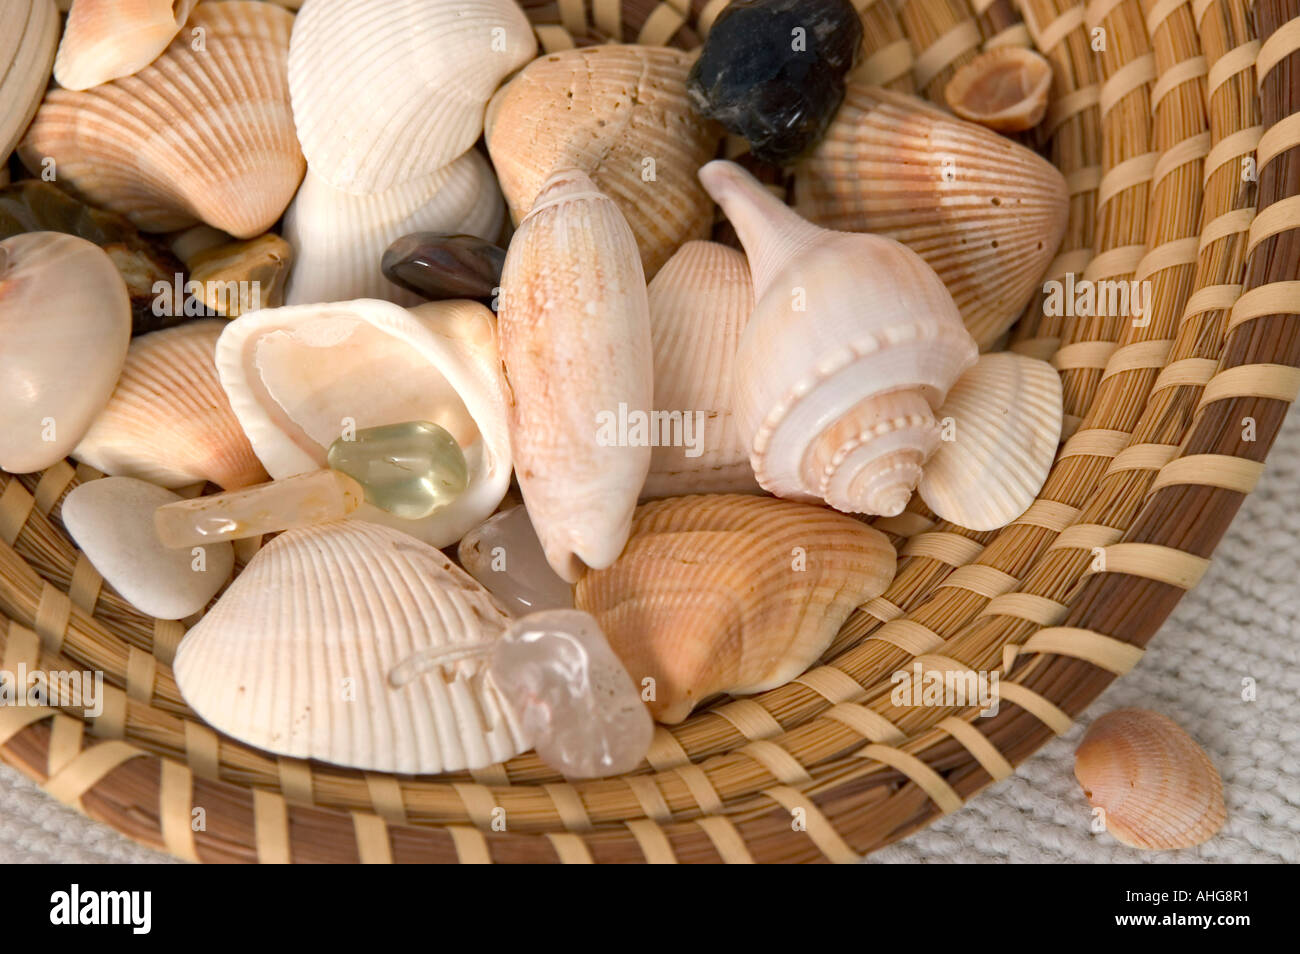 Closeup of seashell collection in pine needle basket from Atlantic Ocean USA Stock Photo